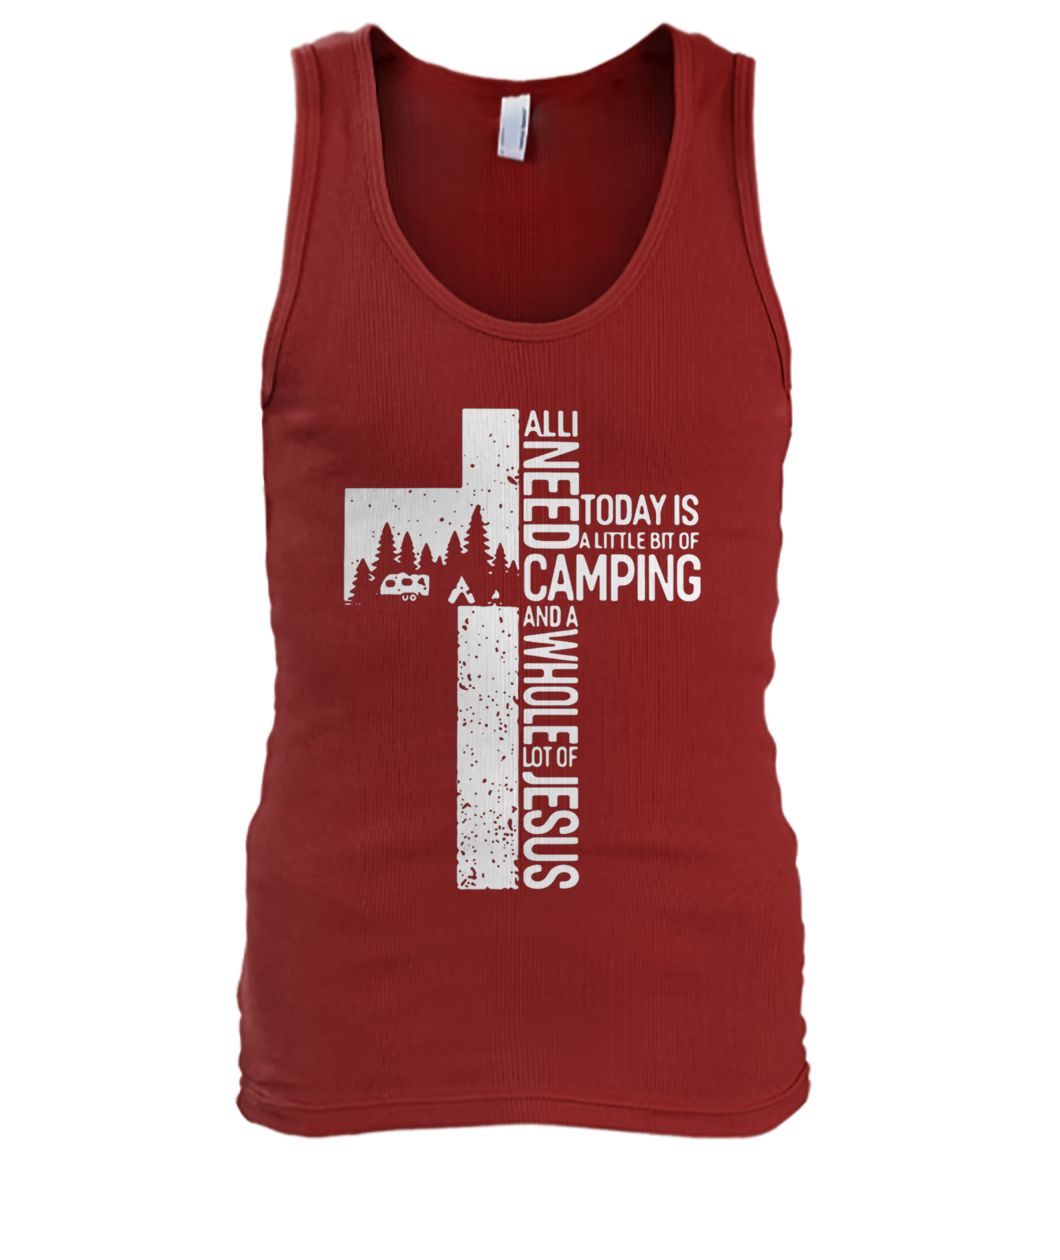 All I need today is a little bit of camping and a whole lot of the cross Jesus men's tank top